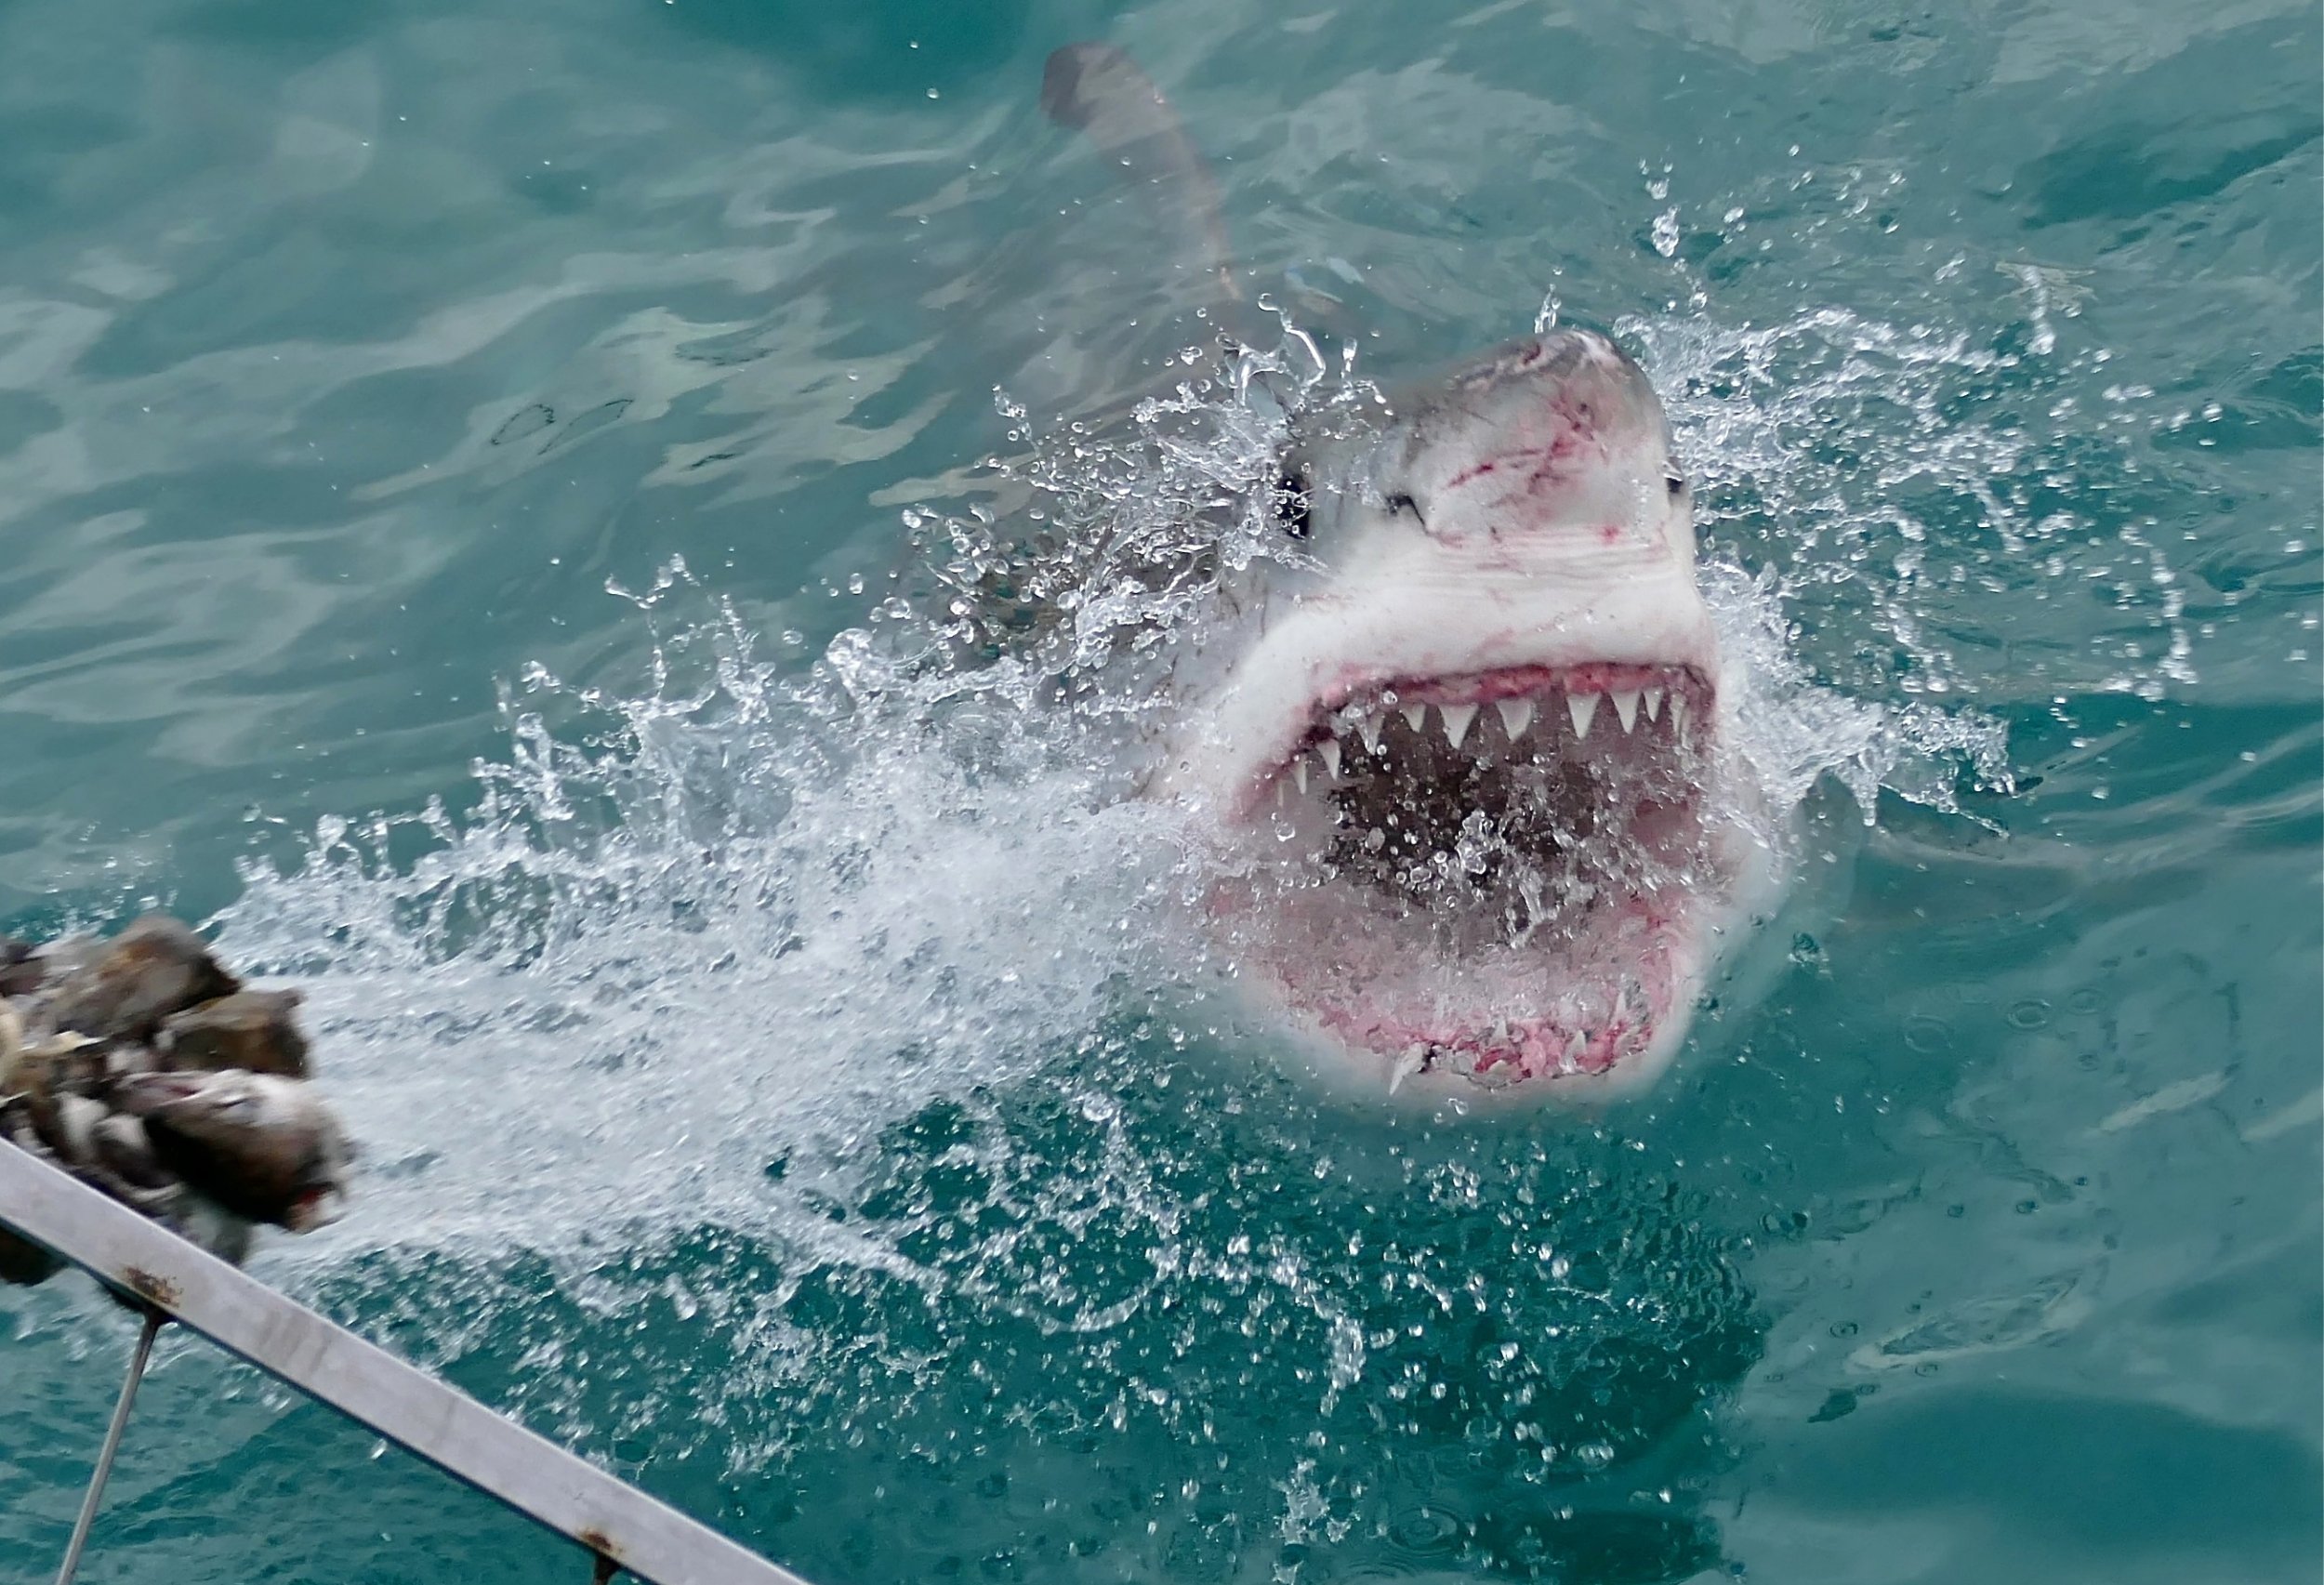 Is Australia really seeing more shark attacks?